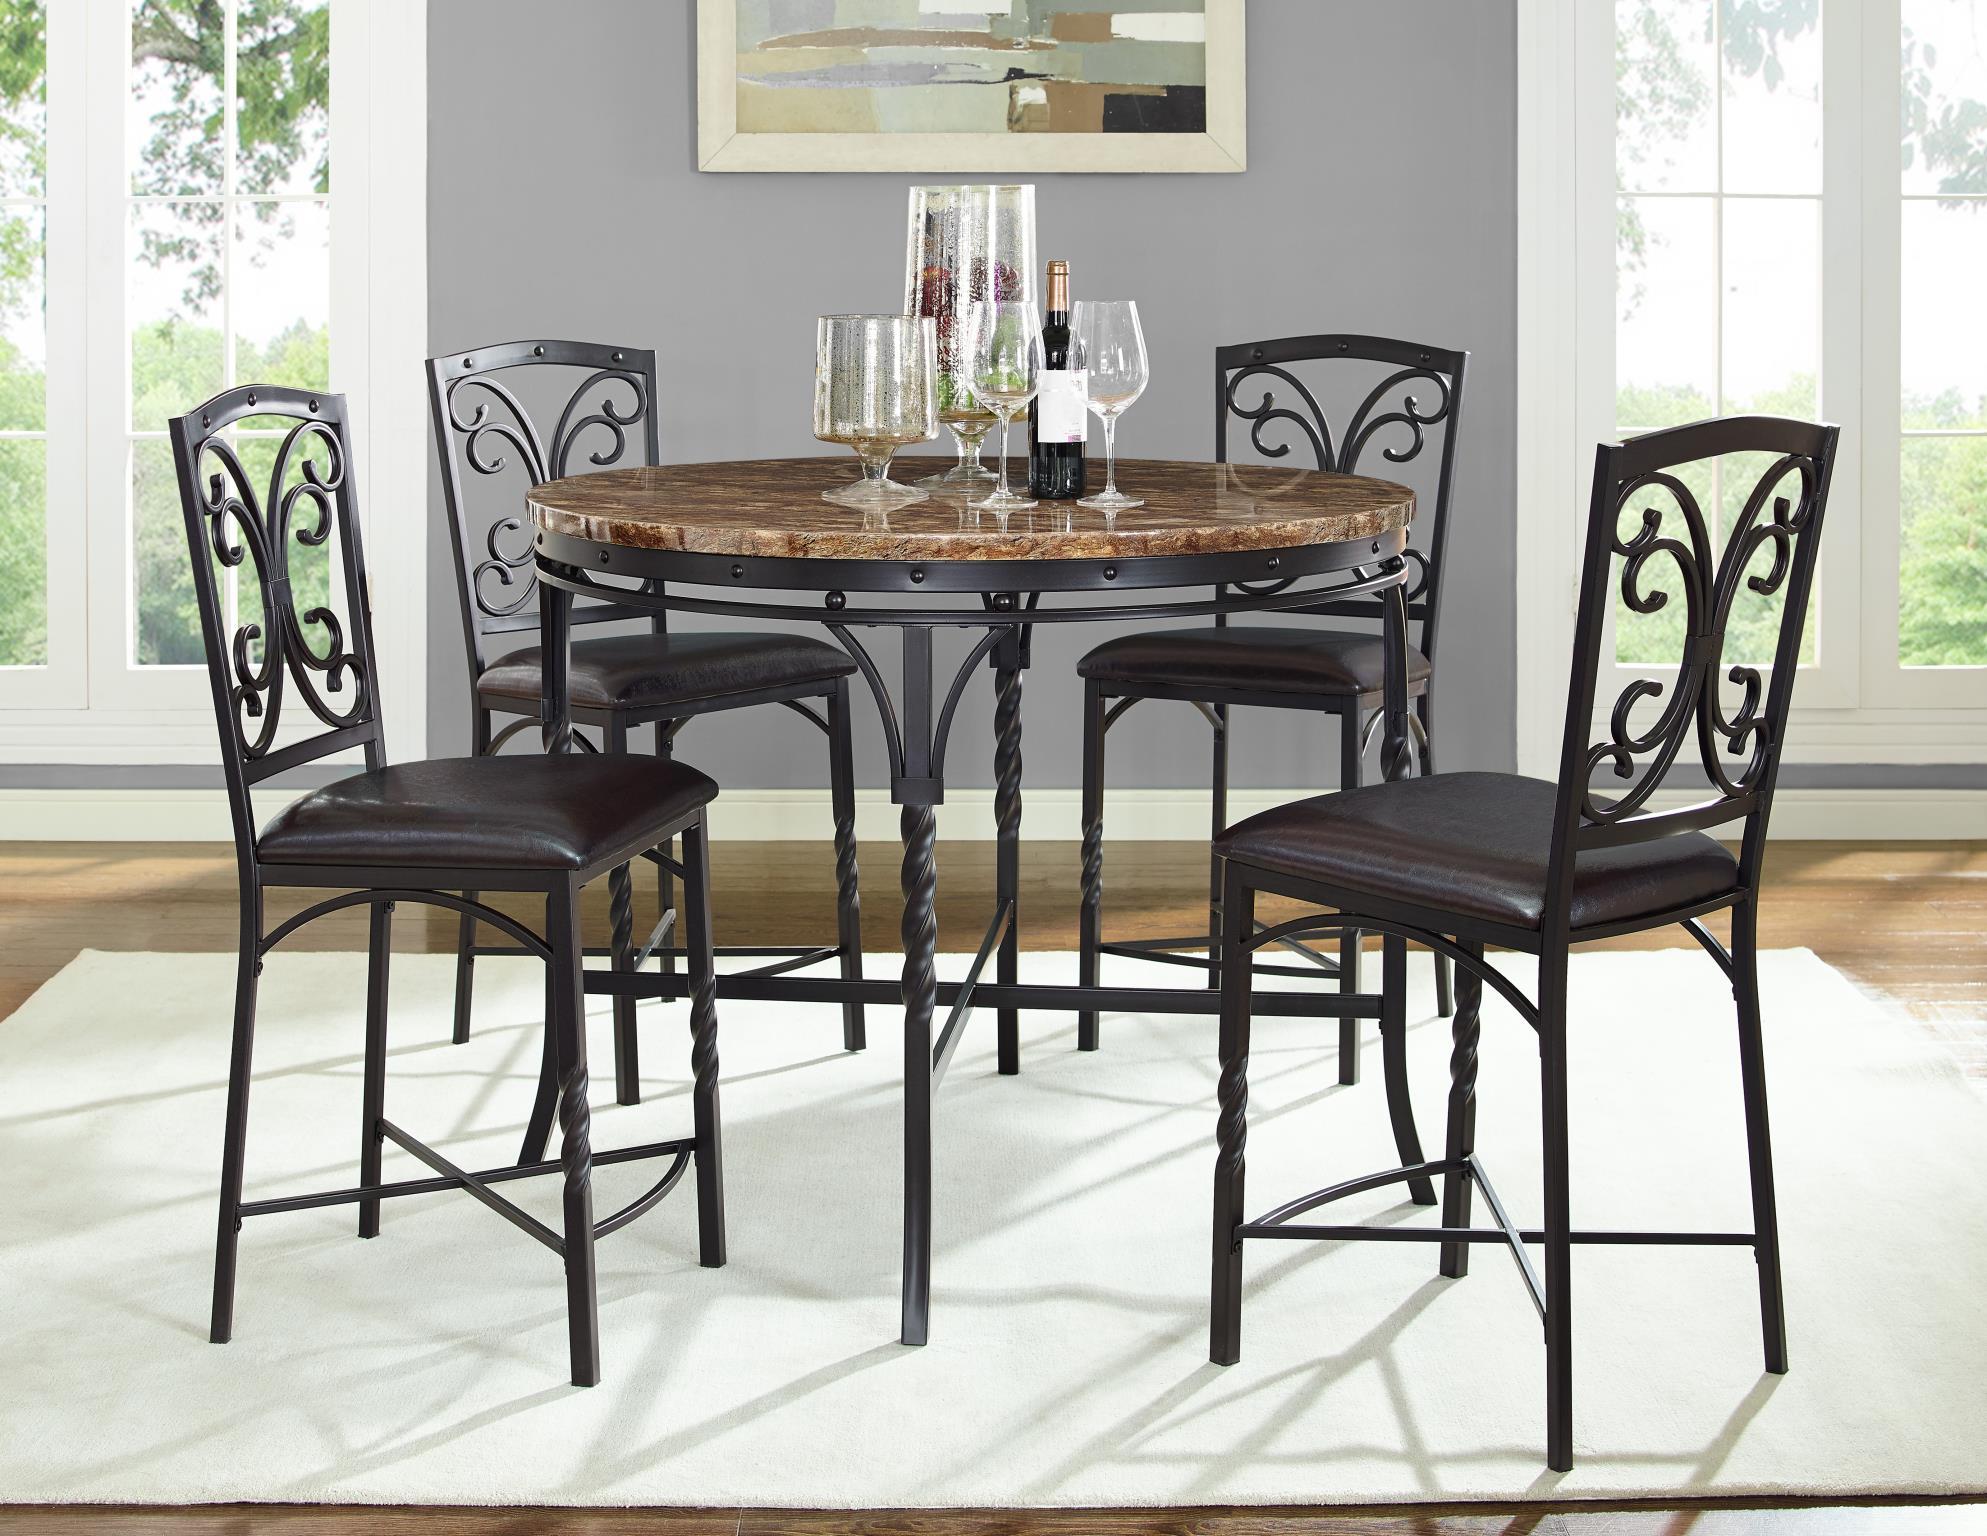 Contemporary, Casual Counter Stool Set Tuscan 4553-4pcs in Brown, Black PU